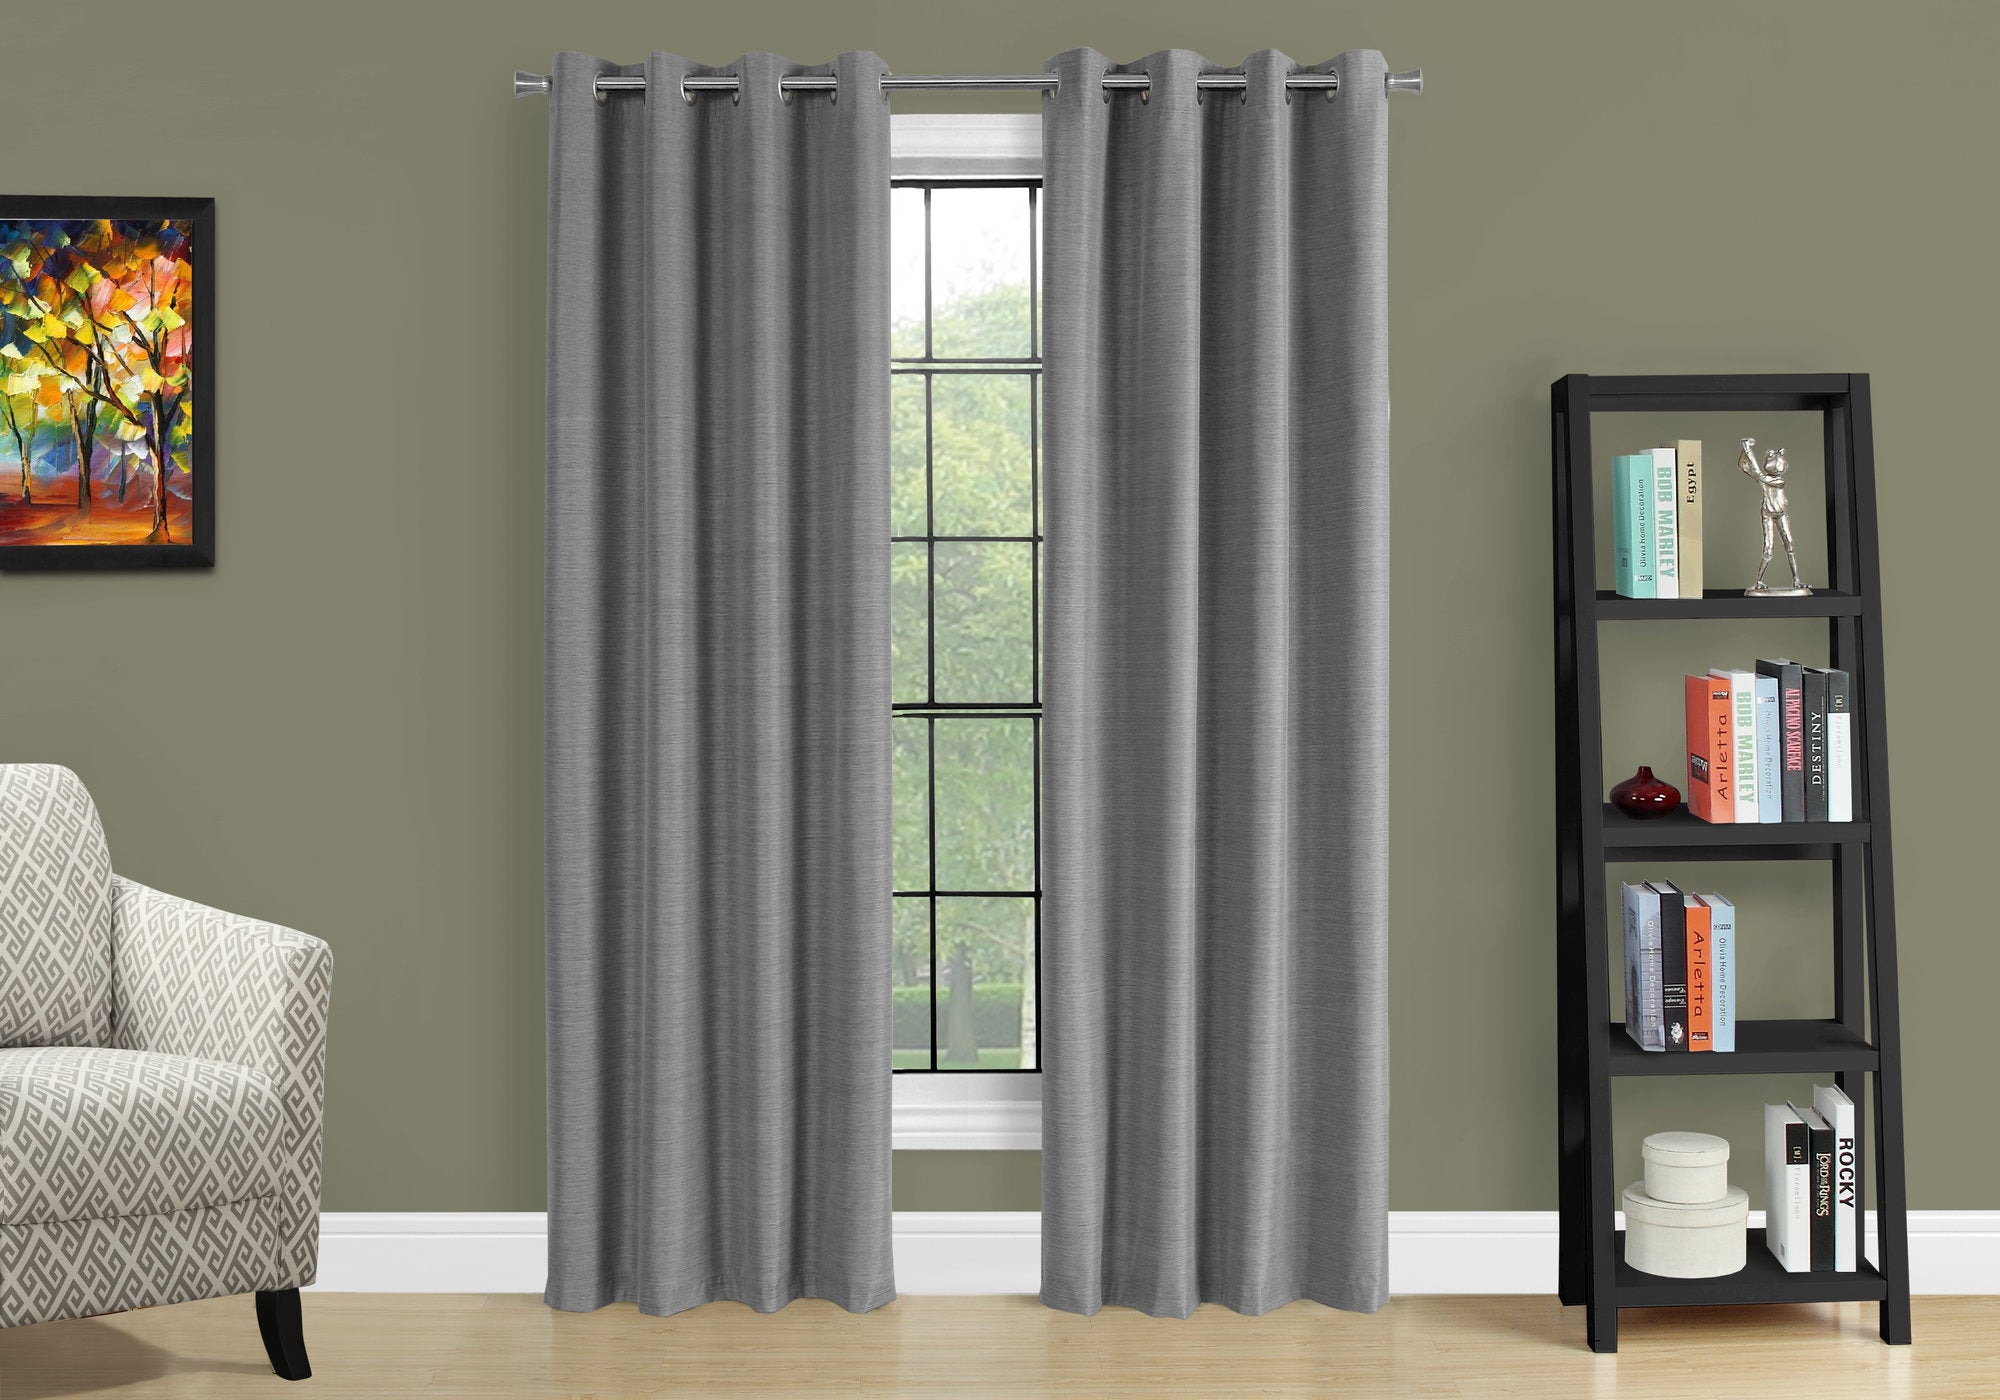 MN-849841    Curtain Panel, 2Pcs Set, 54"W X 84"L, 100% Blackout, Grommet, Living Room, Bedroom, Kitchen, Thermal Insulation Fabric, Polyester Full Light Blocking Fabric, Grey, Contemporary, Modern